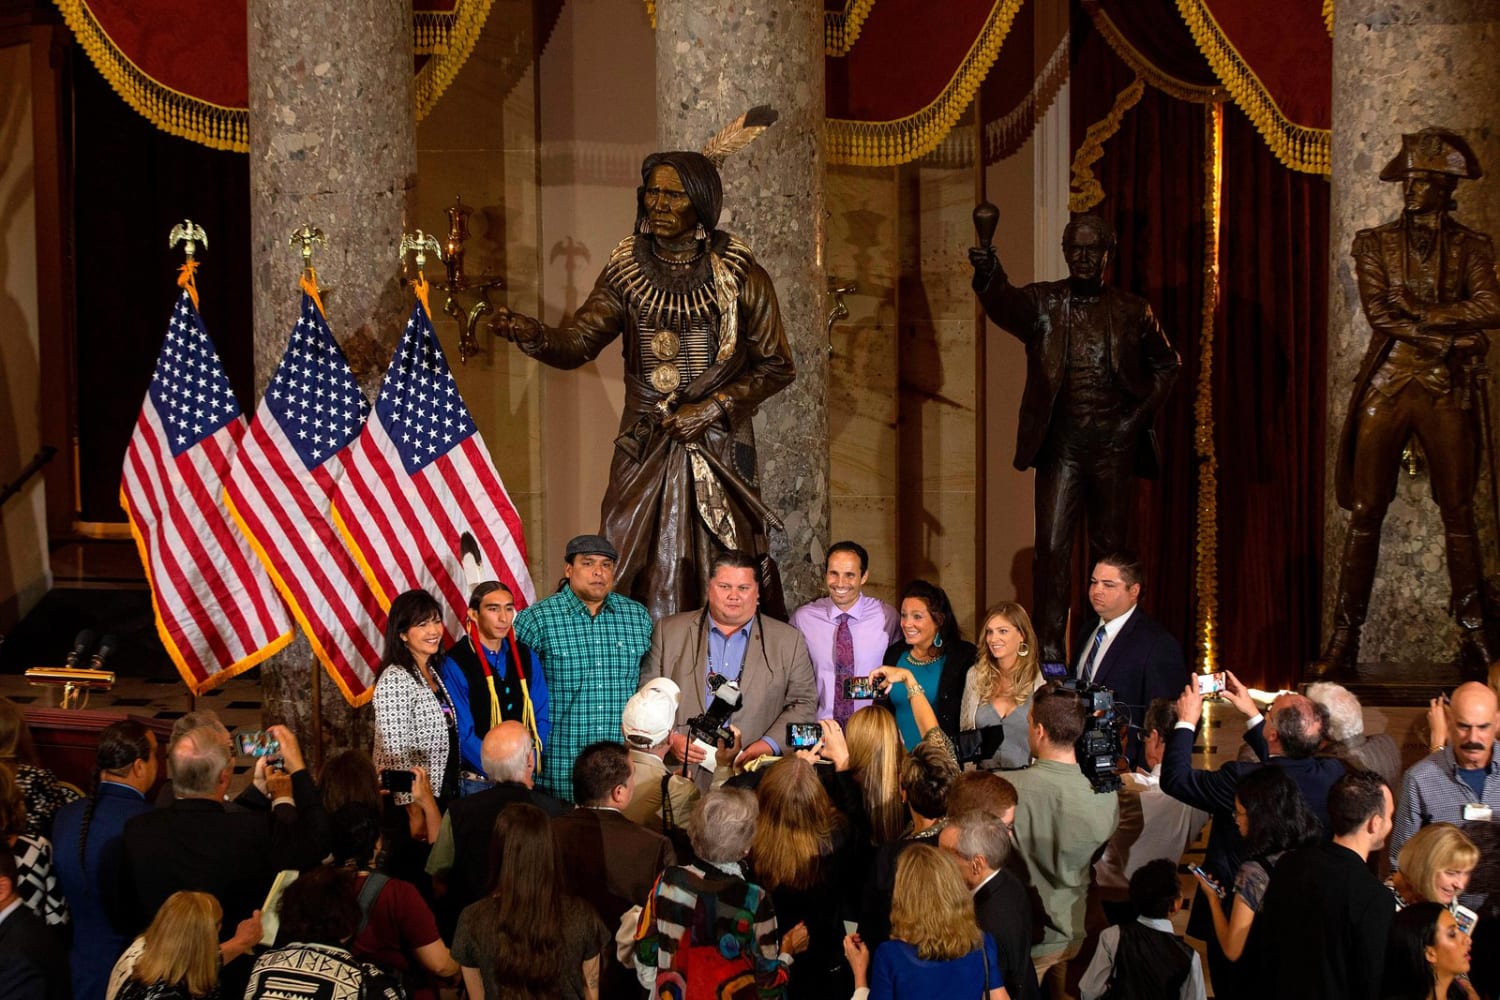 Chief Standing Bear, Who Fought for Native American Freedoms, Is Honored With a Statue in the Capitol